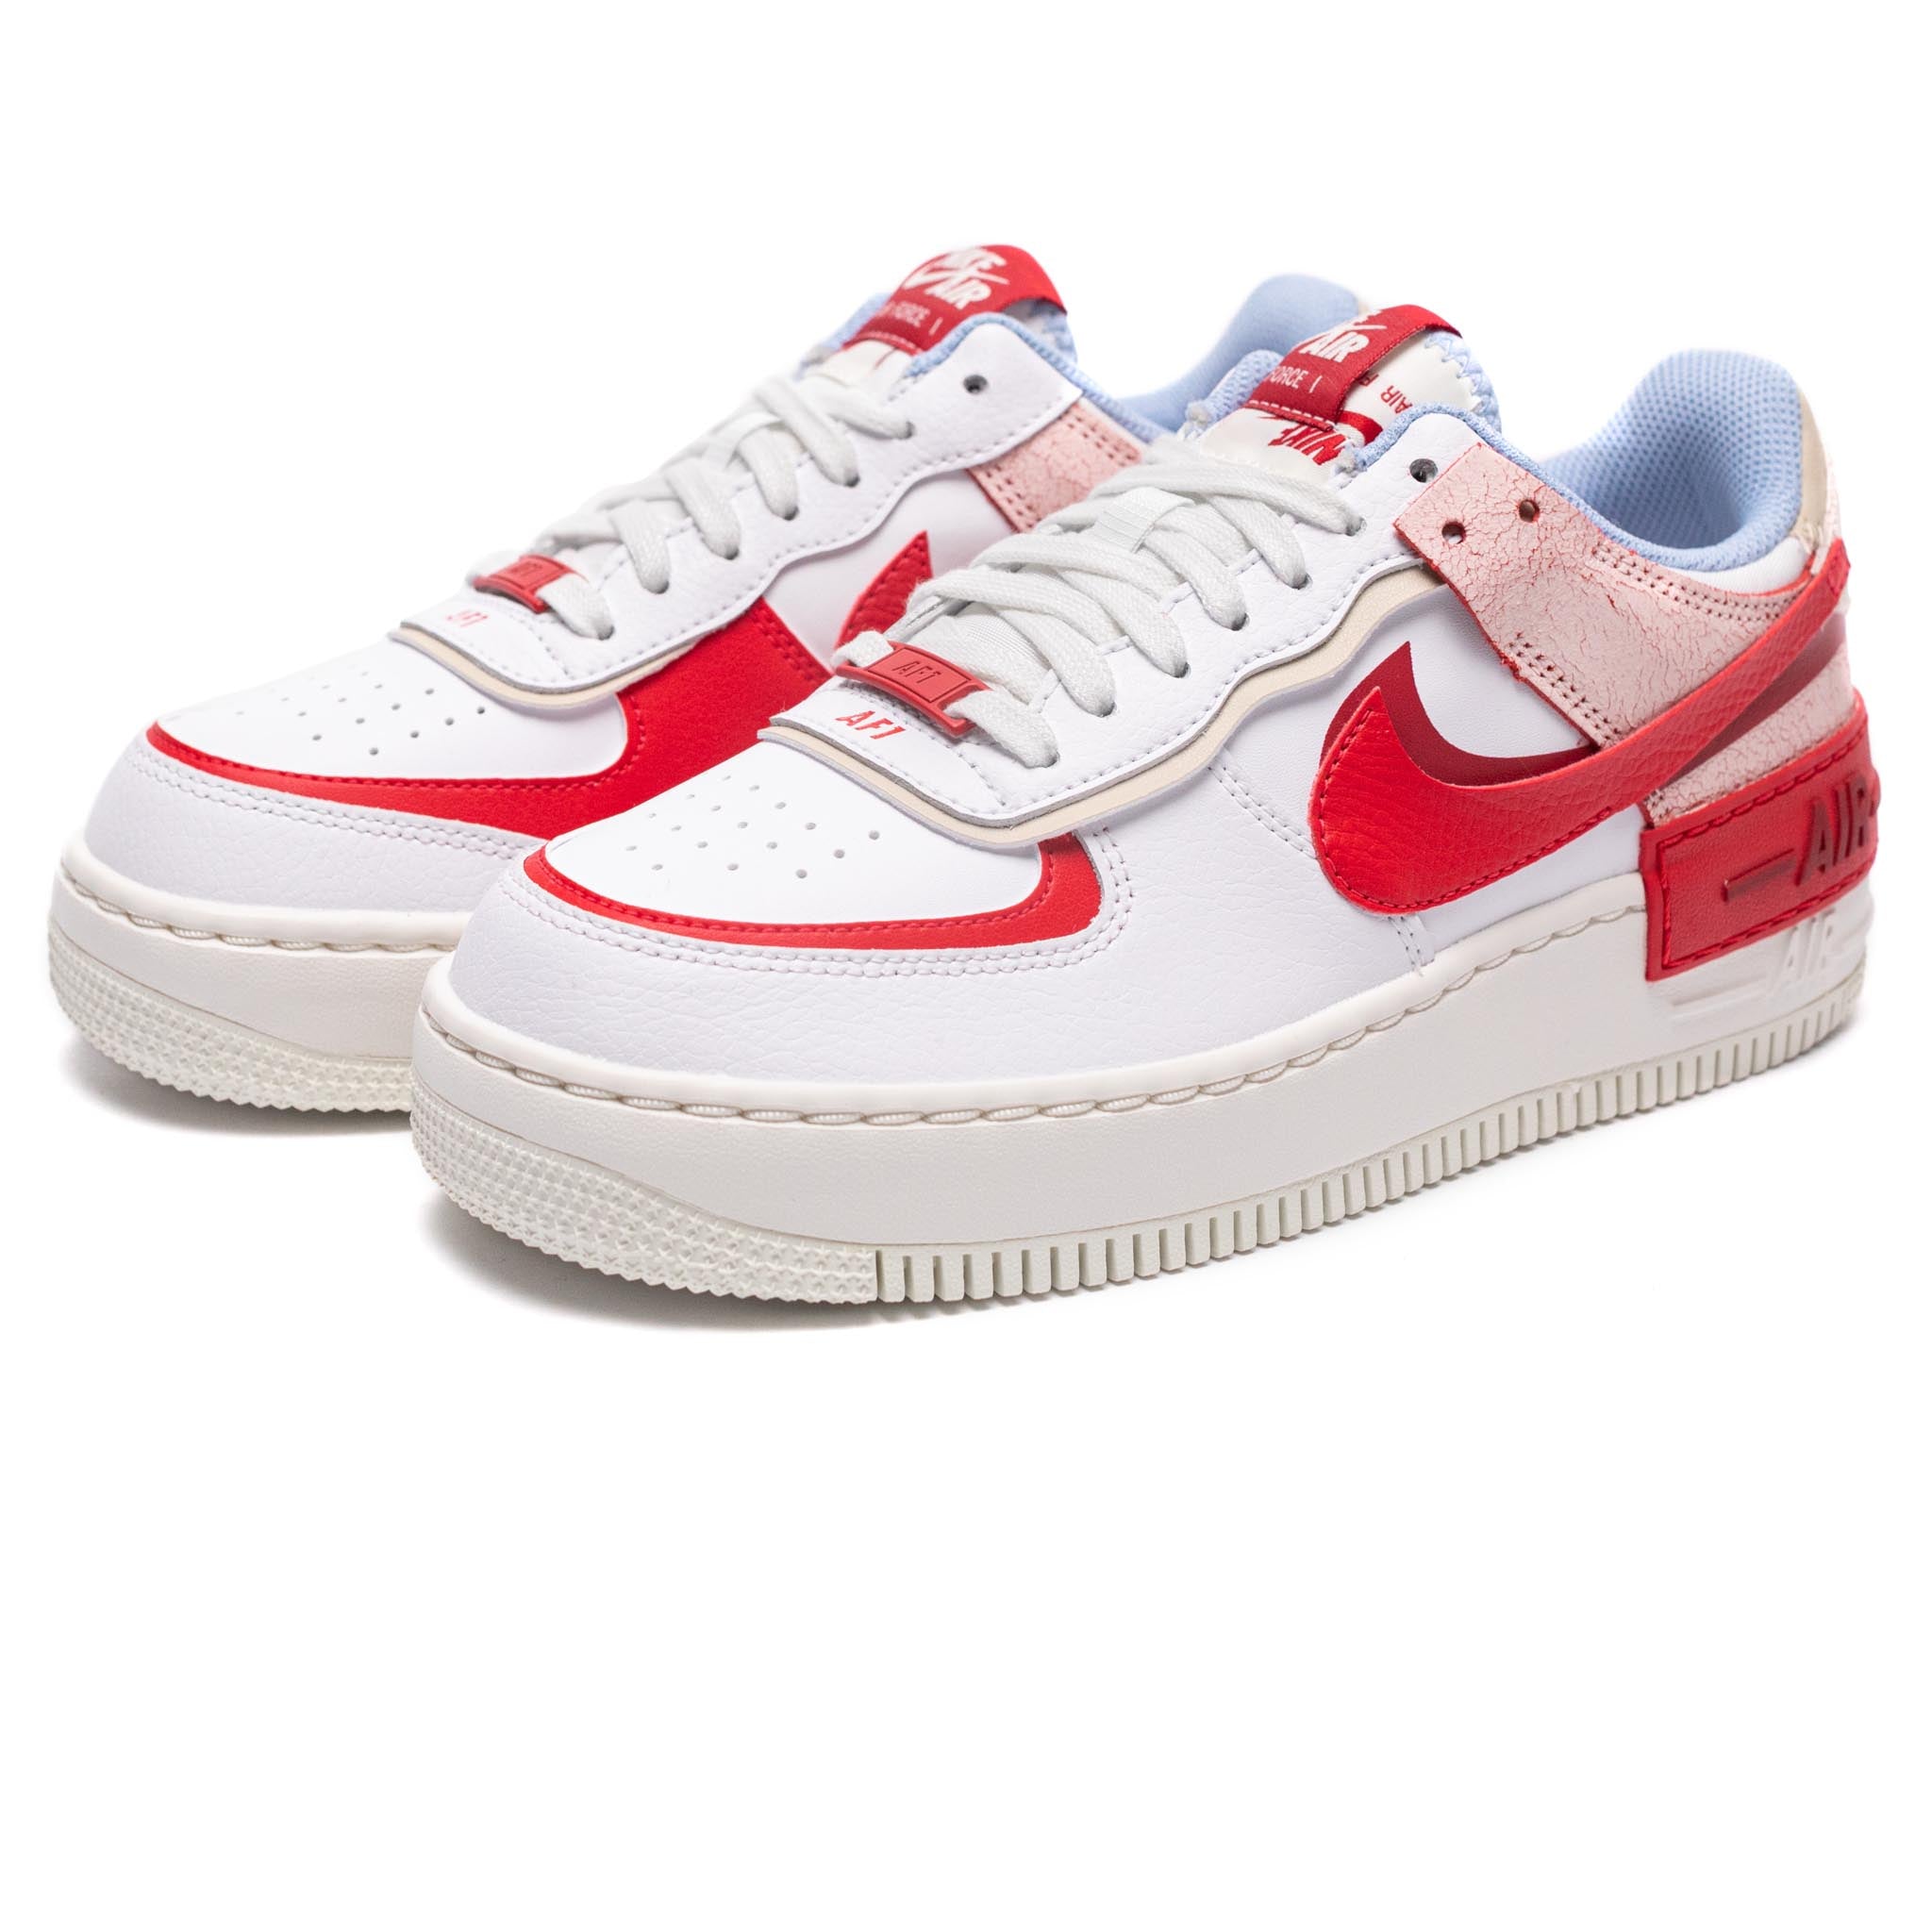 Nike Air Force 1 Shadow 'Summit White/University Red'